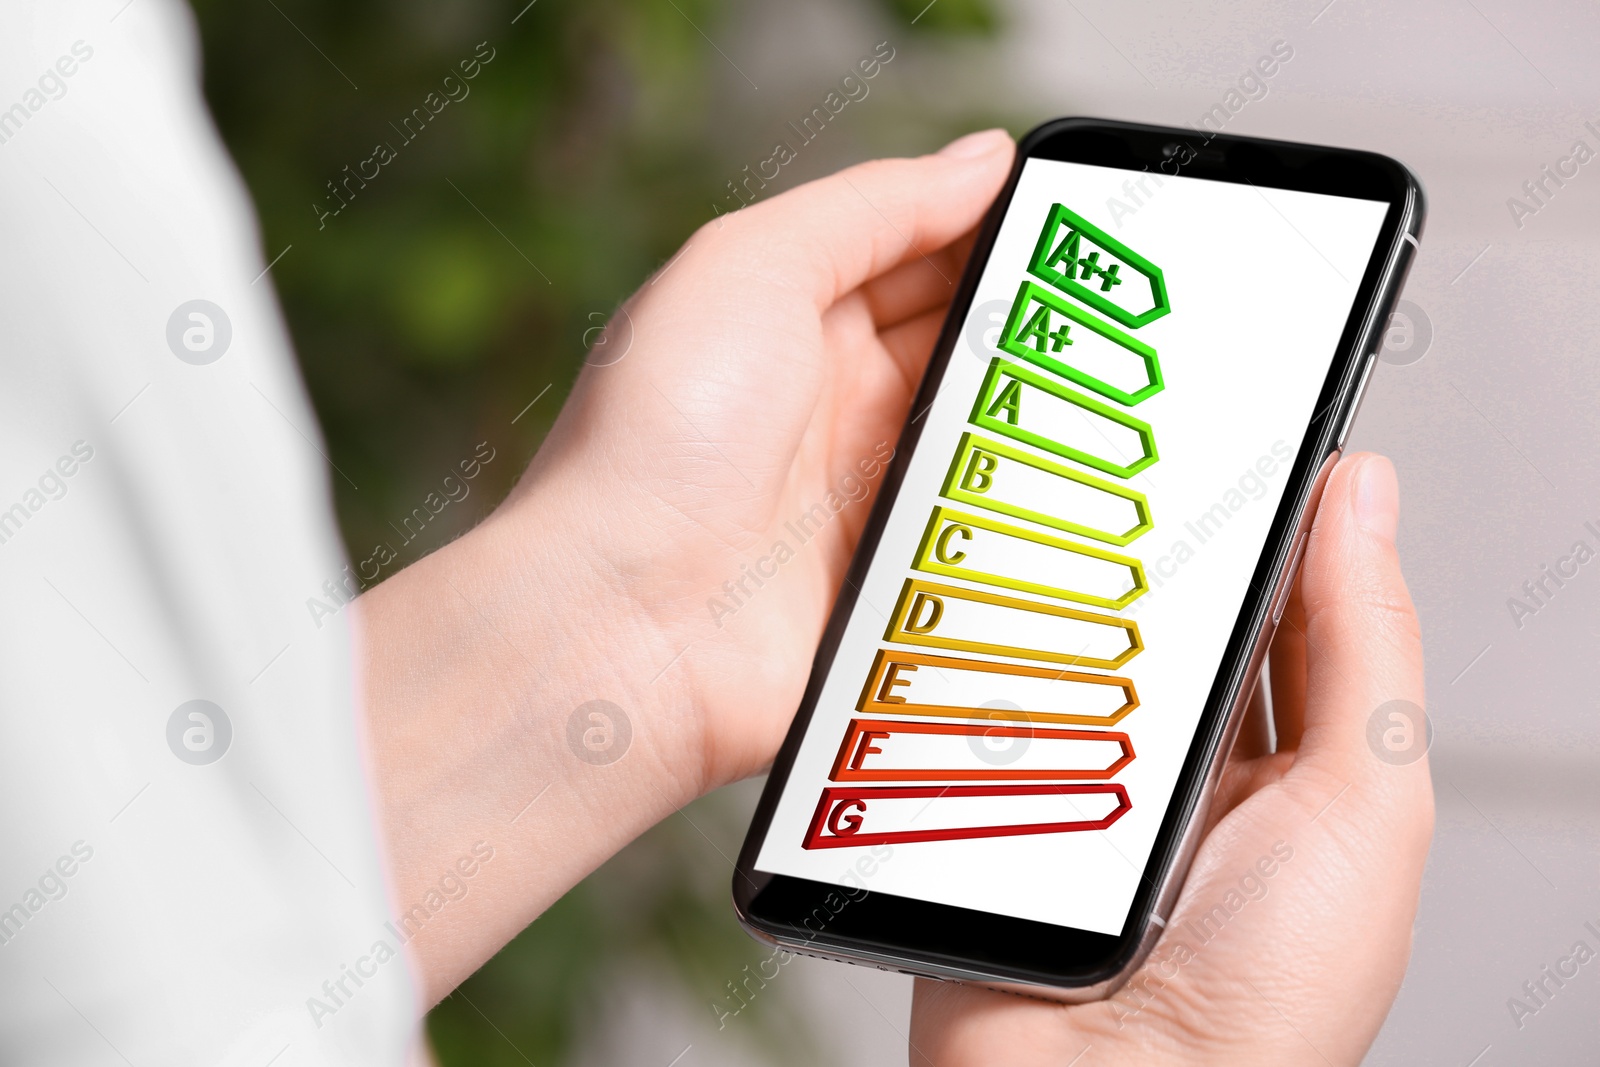 Image of Energy efficiency. Woman using smartphone with colorful rating on display indoors, closeup